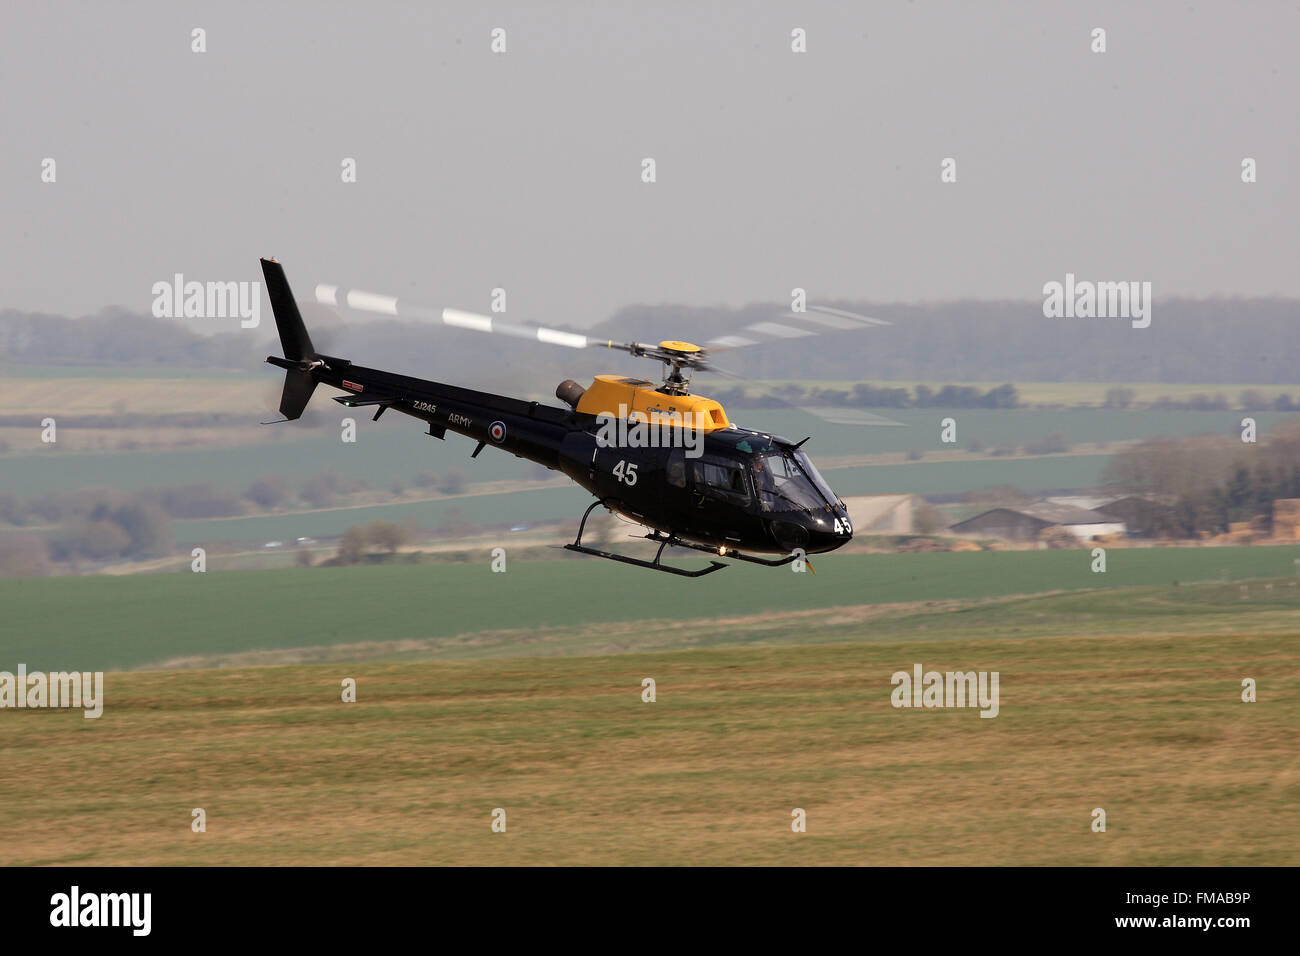 Army Air Corps Squirrel HT2 helicopter Middle Wallop AAC training flight Salisbury Plain Training Area SPTA helicopter military aviation rotary flight flying pilot training military test testing exercise skills instruction Stock Photo